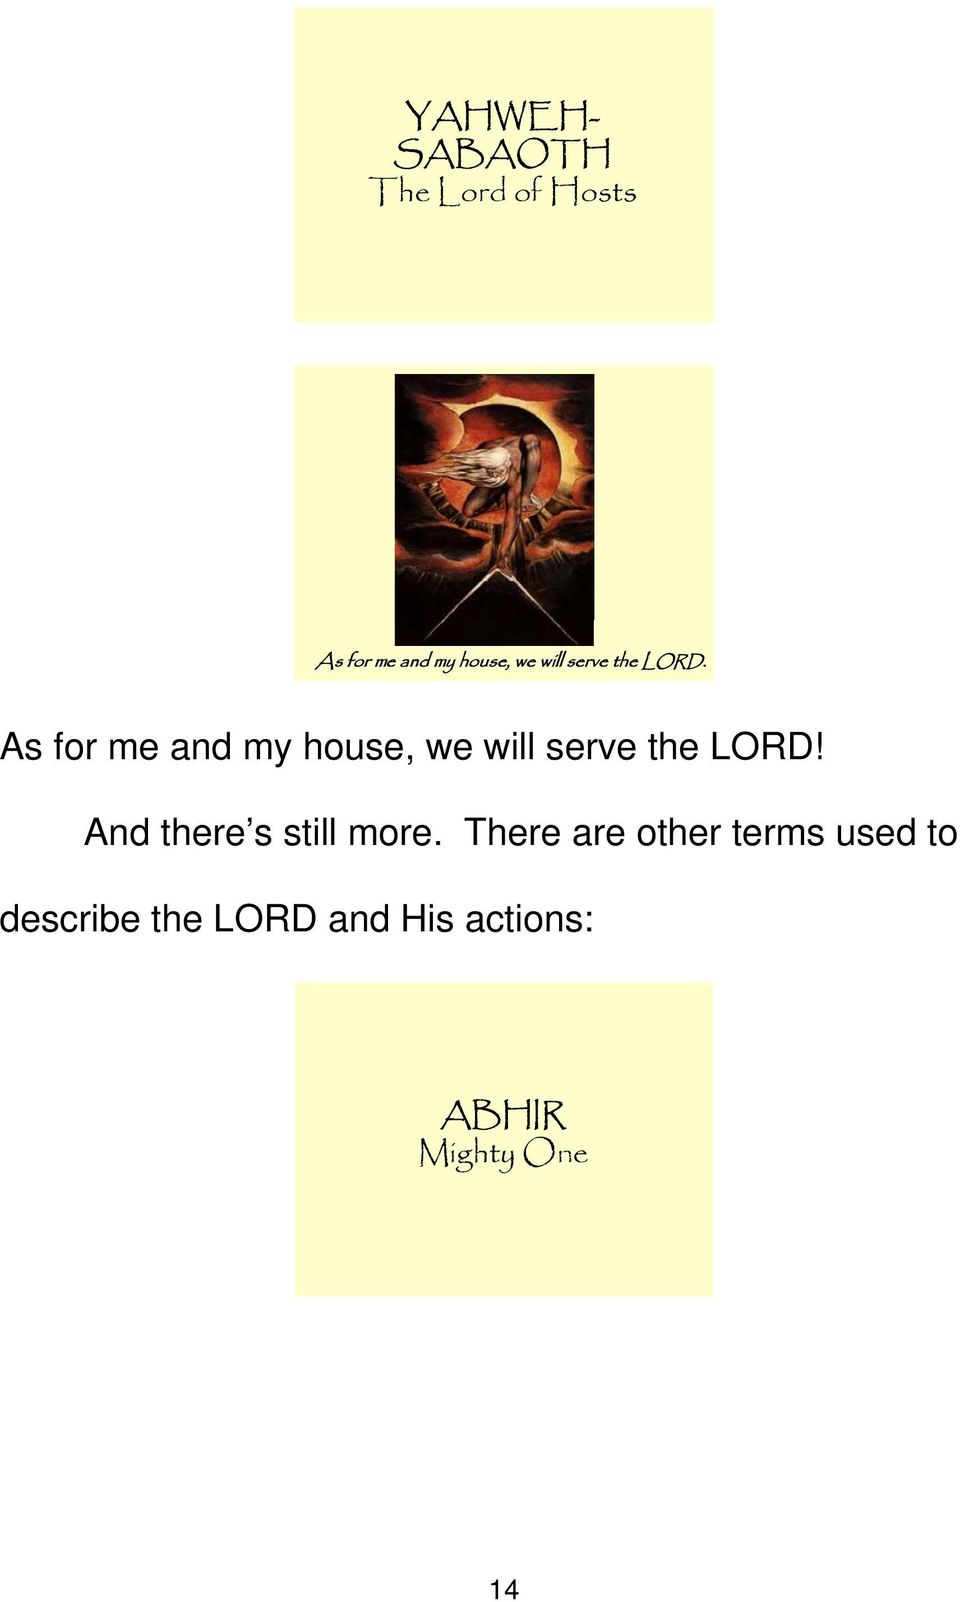 As for me and my house, we will serve the LORD!